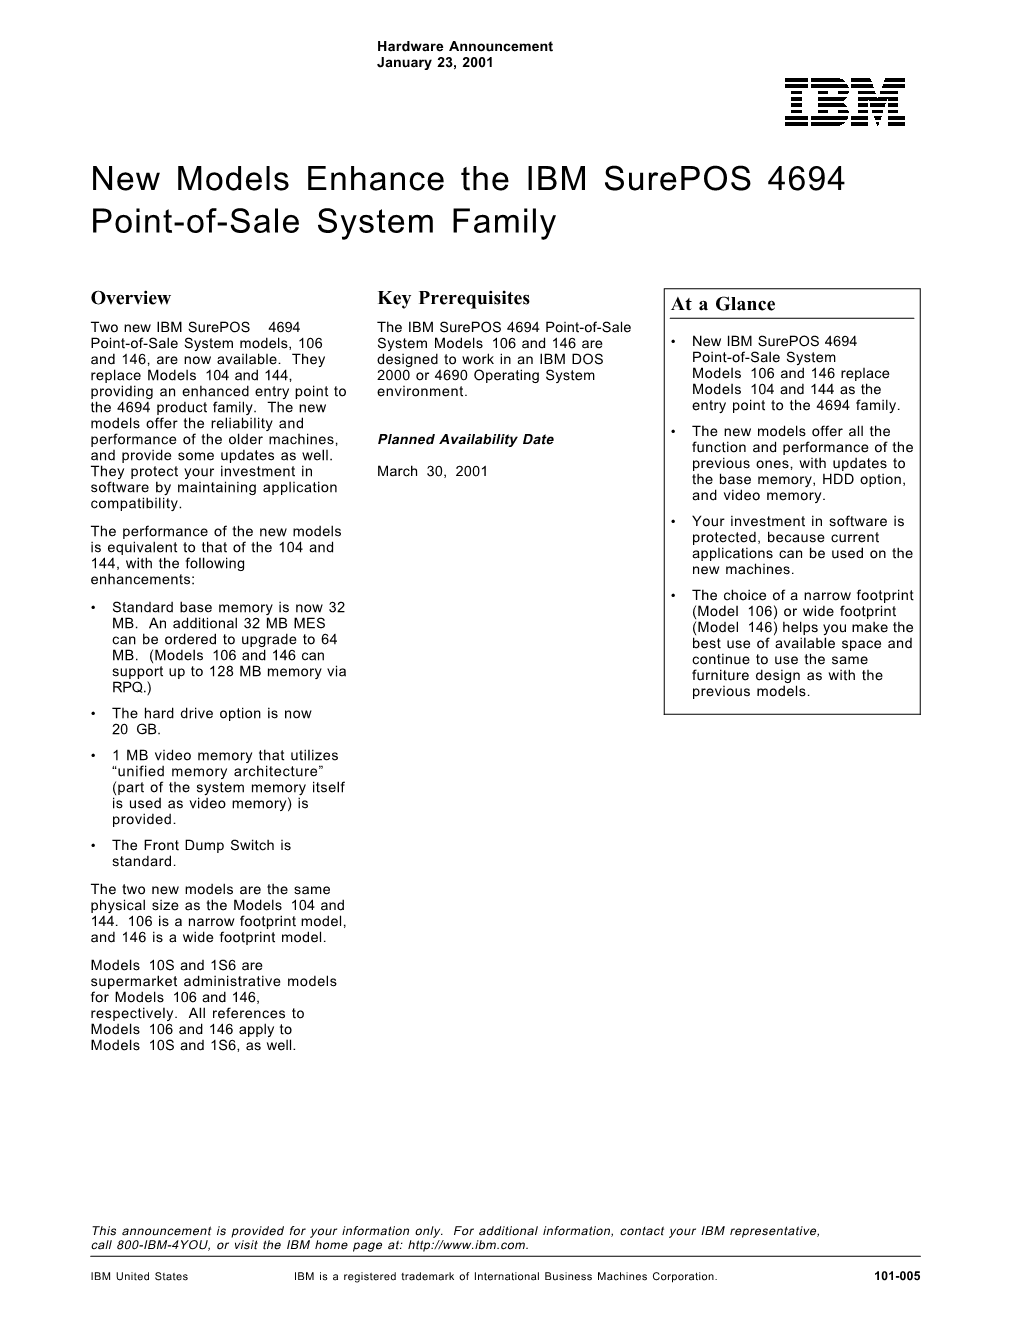 New Models Enhance the IBM Surepos 4694 Point-Of-Sale System Family